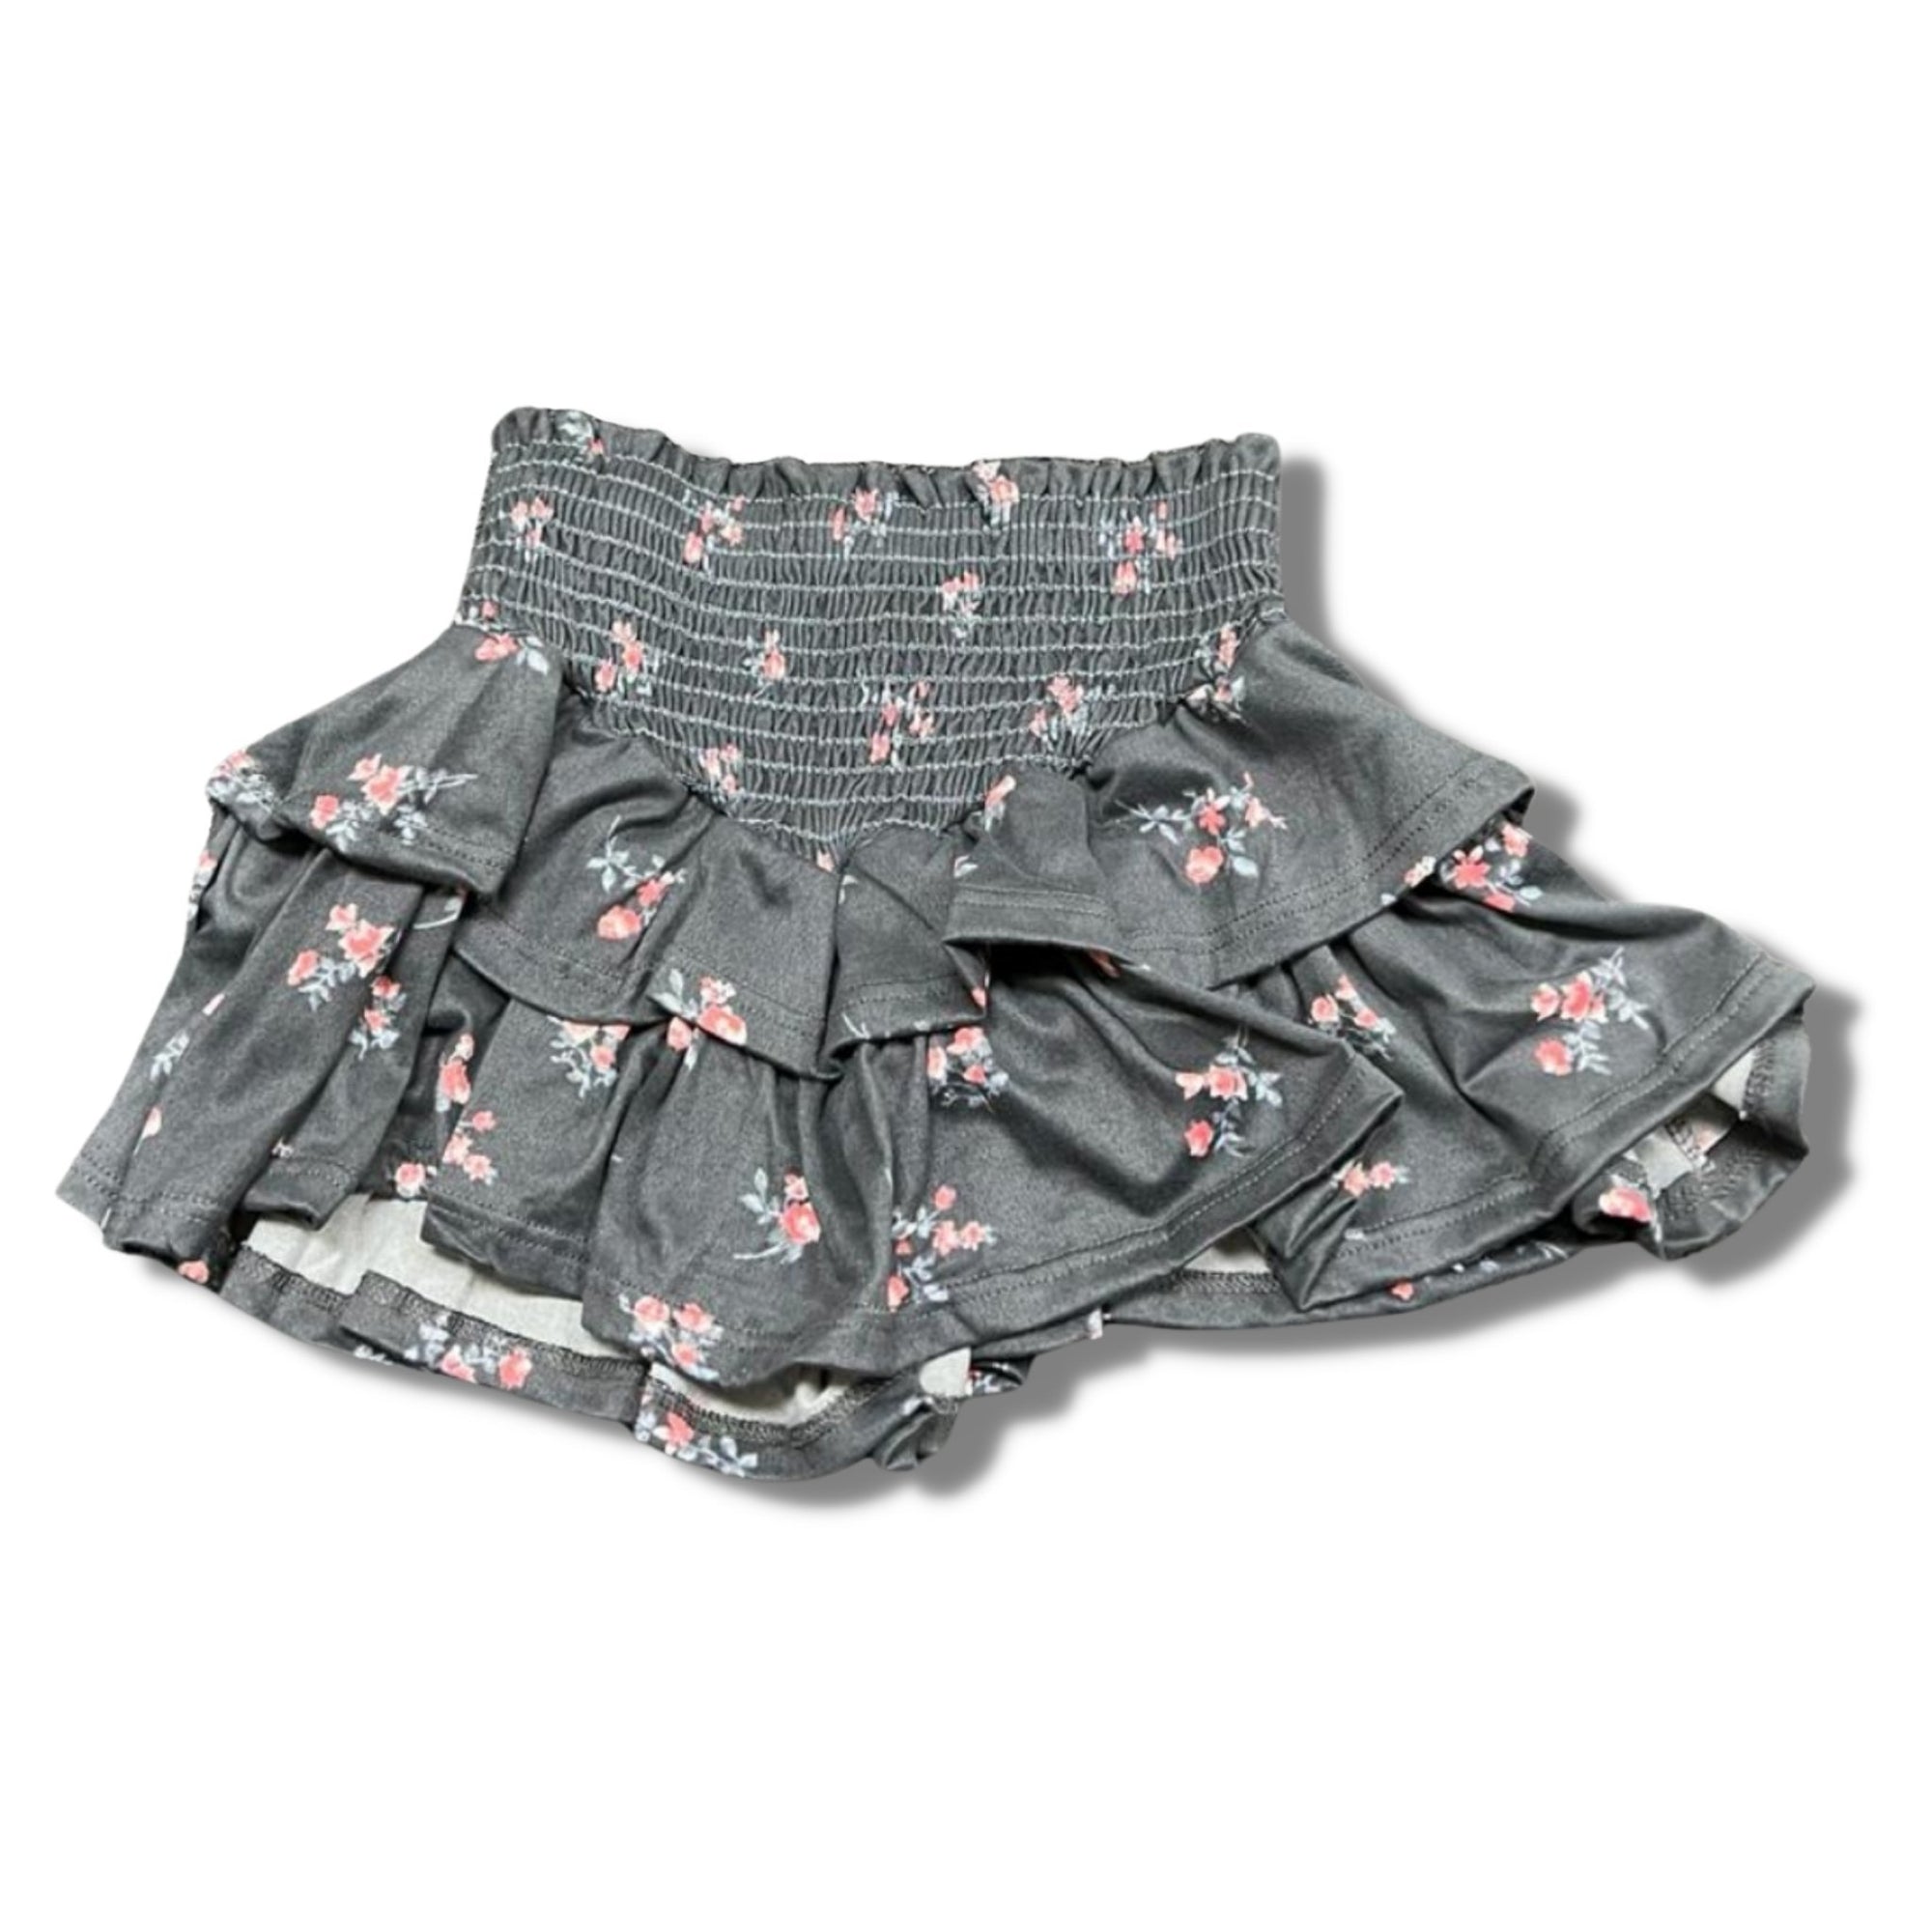 Tweenstyle Charcoal Floral Print On Soft Jersey Smoked Waist Tiered Skirt - a Spirit Animal - Skirts $45-$60 Blush bottoms